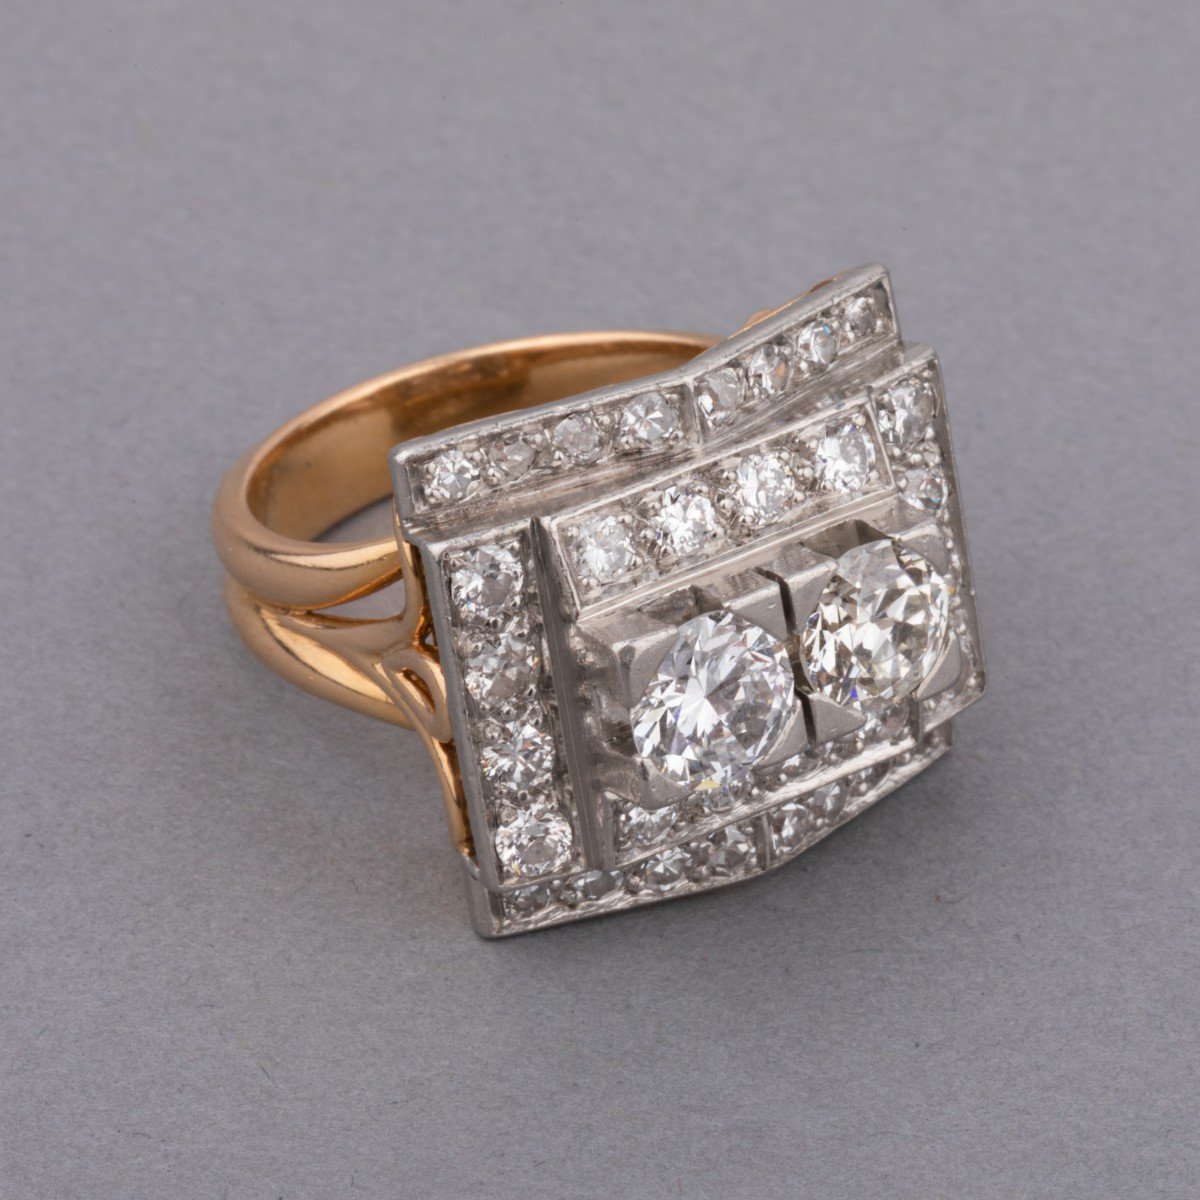 Old Ring In Platinum Gold And 3 Carats Of Diamonds-photo-3